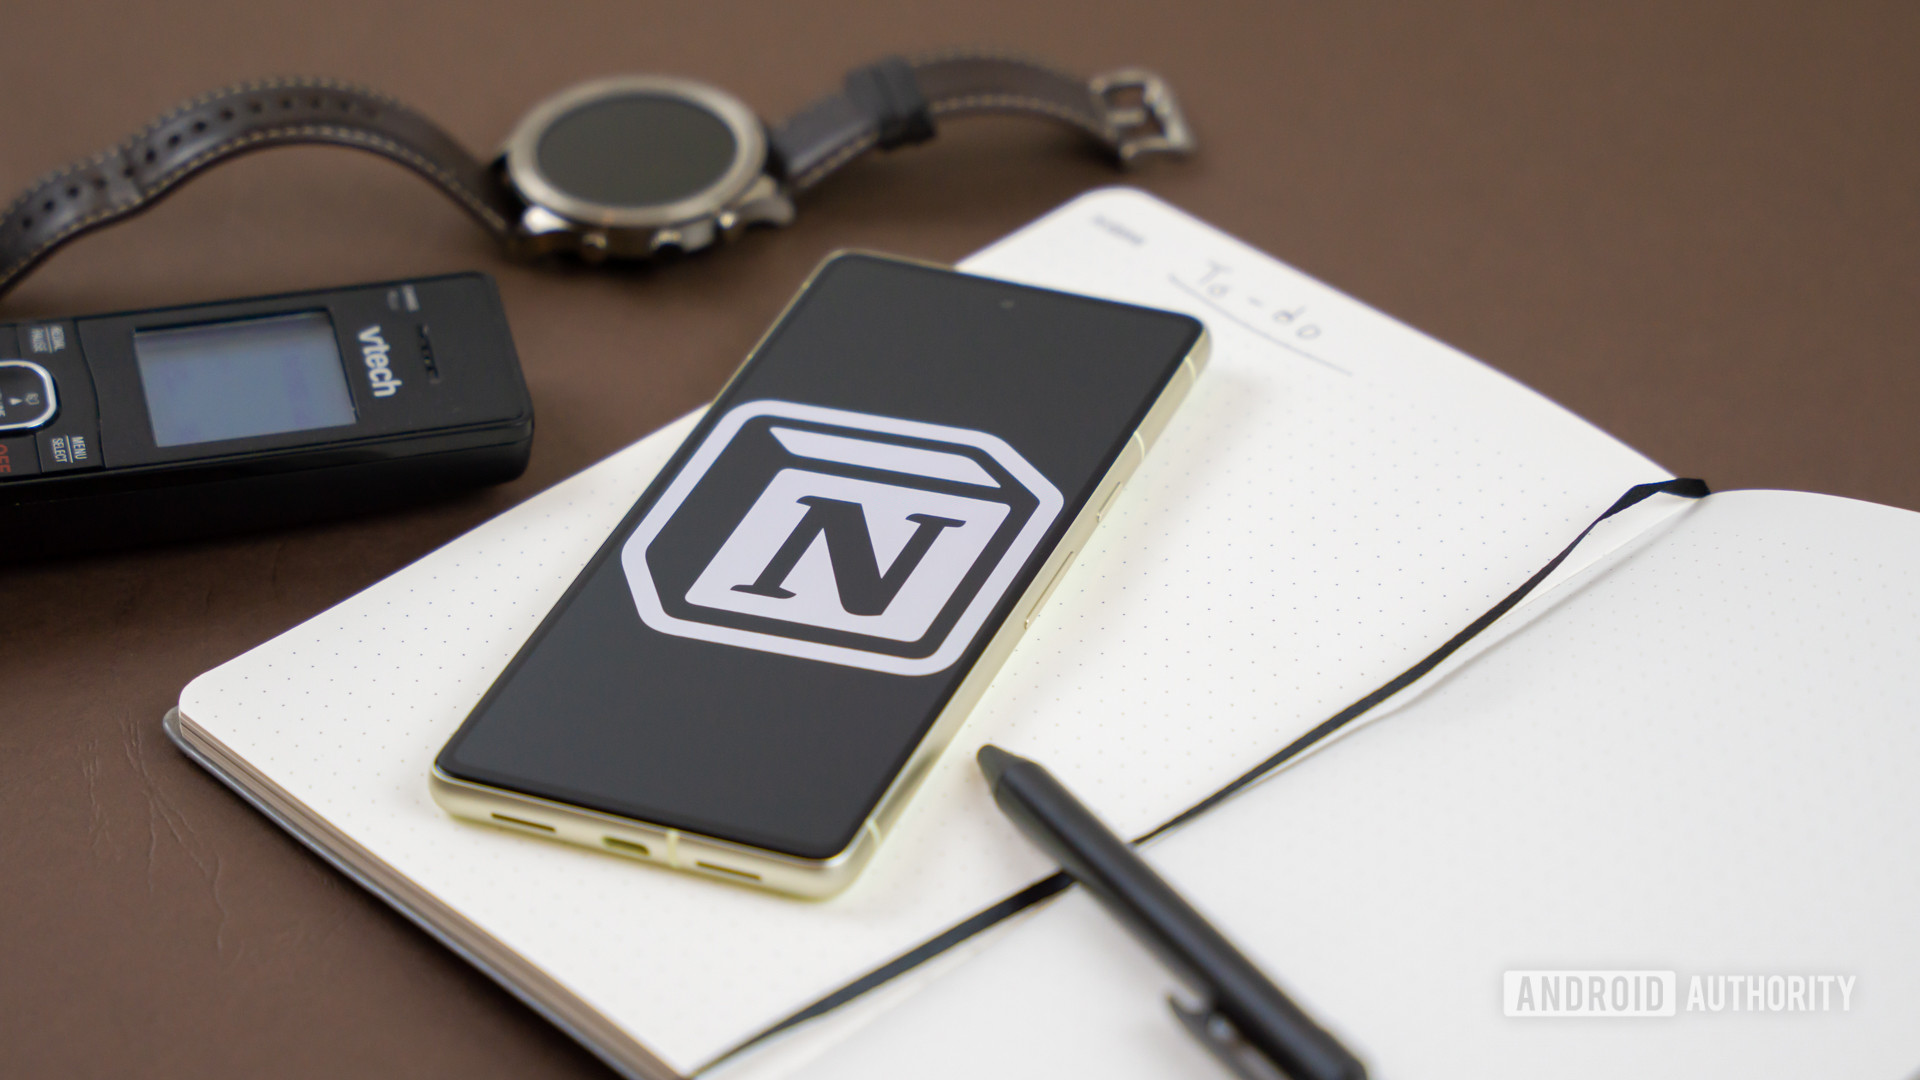 Notion logo on snartphone next to other office products Stock photo 1